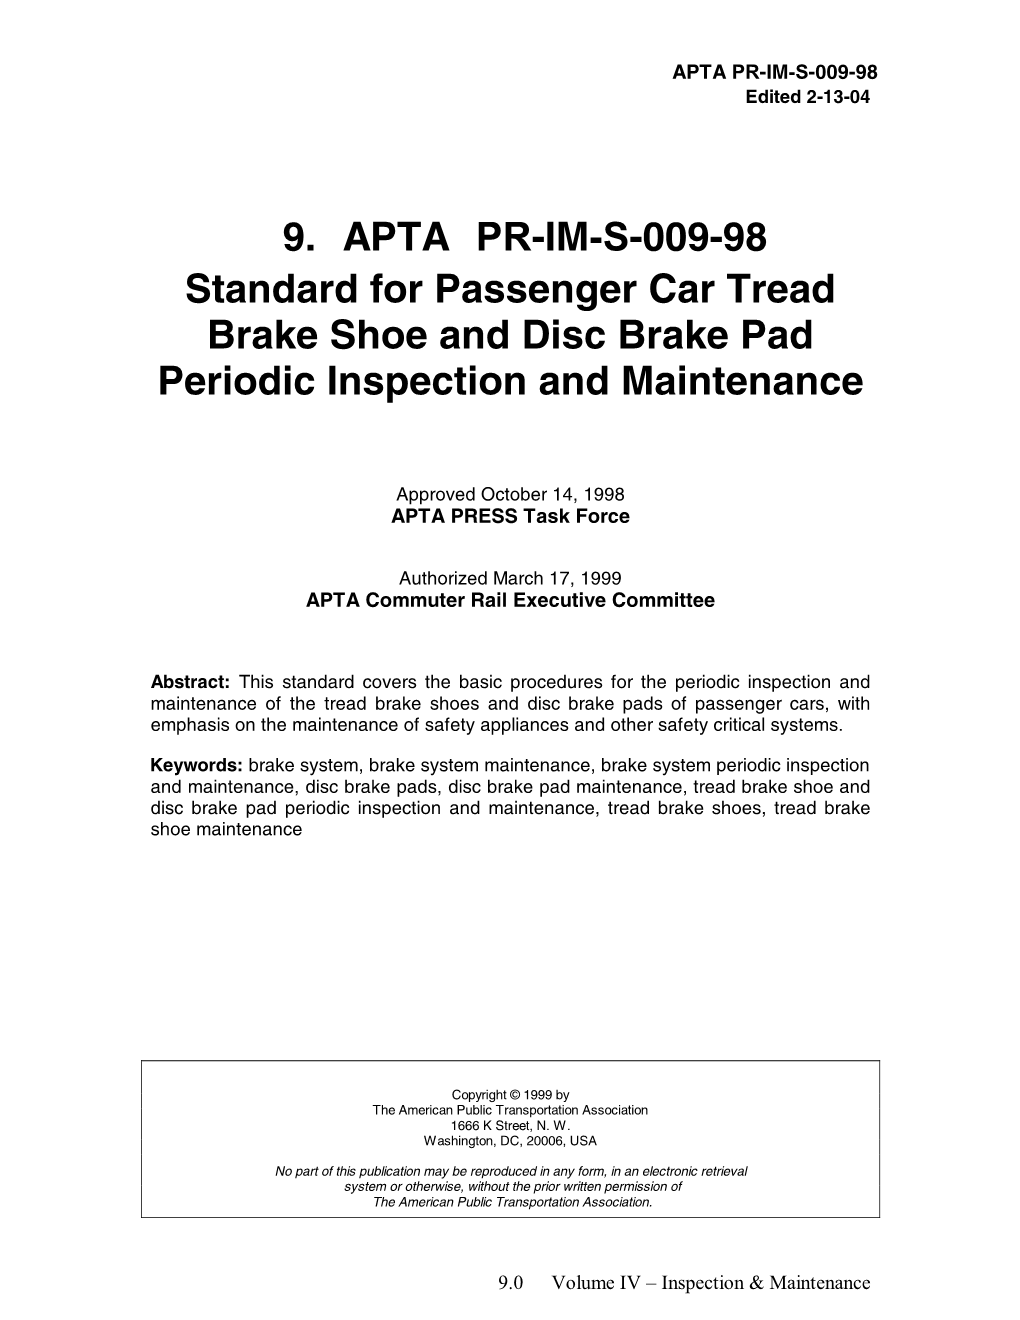 Standard for Passenger Car Tread Brake Shoe and Disc Brake Pad Periodic Inspection and Maintenance